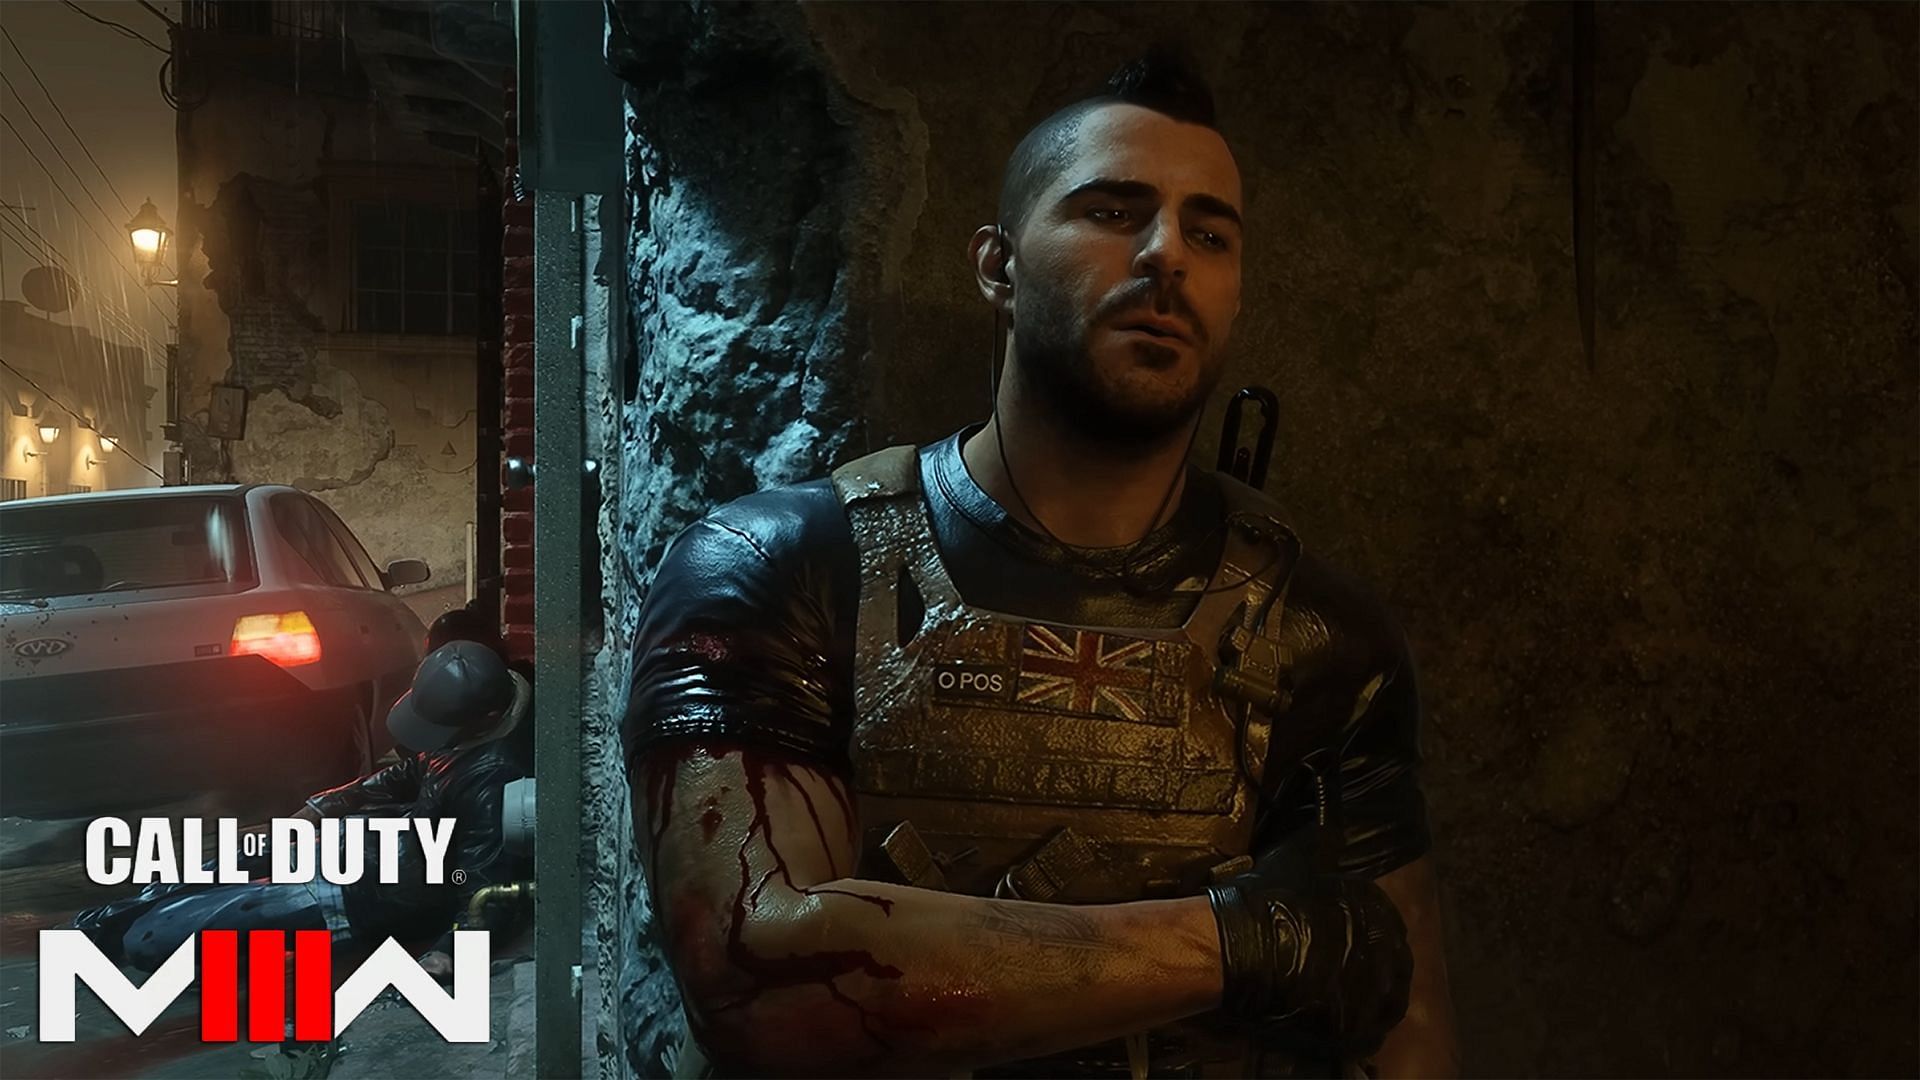 Soap injured putting pressure on his wounds as he rests on a wall in a dark alley. There is also a Modern Warfare 3 logo at the bottom left corner.